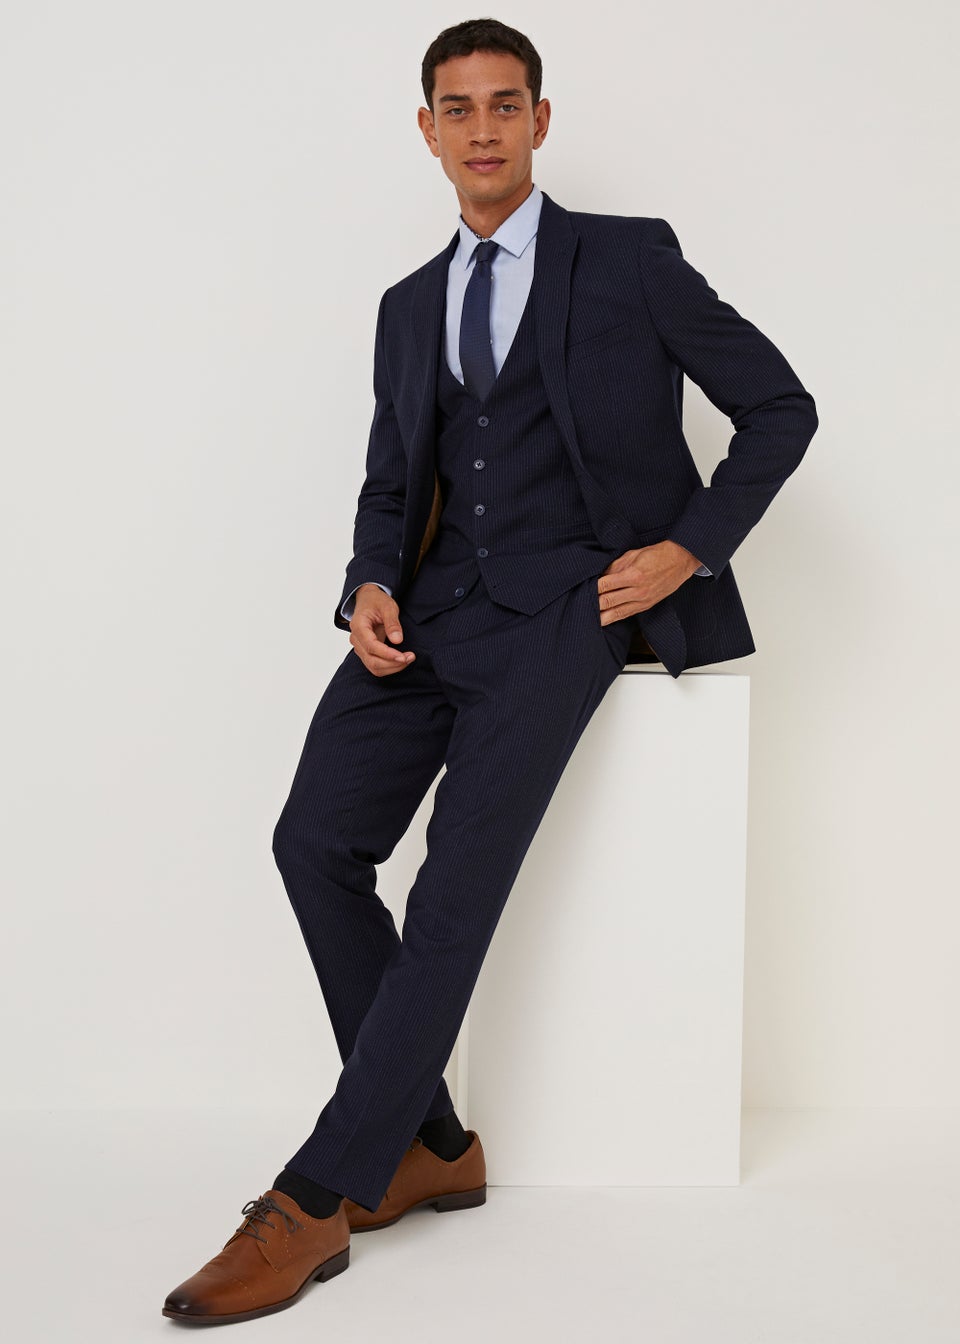 Taylor & Wright Milne Navy Skinny Fit Suit Waistcoat